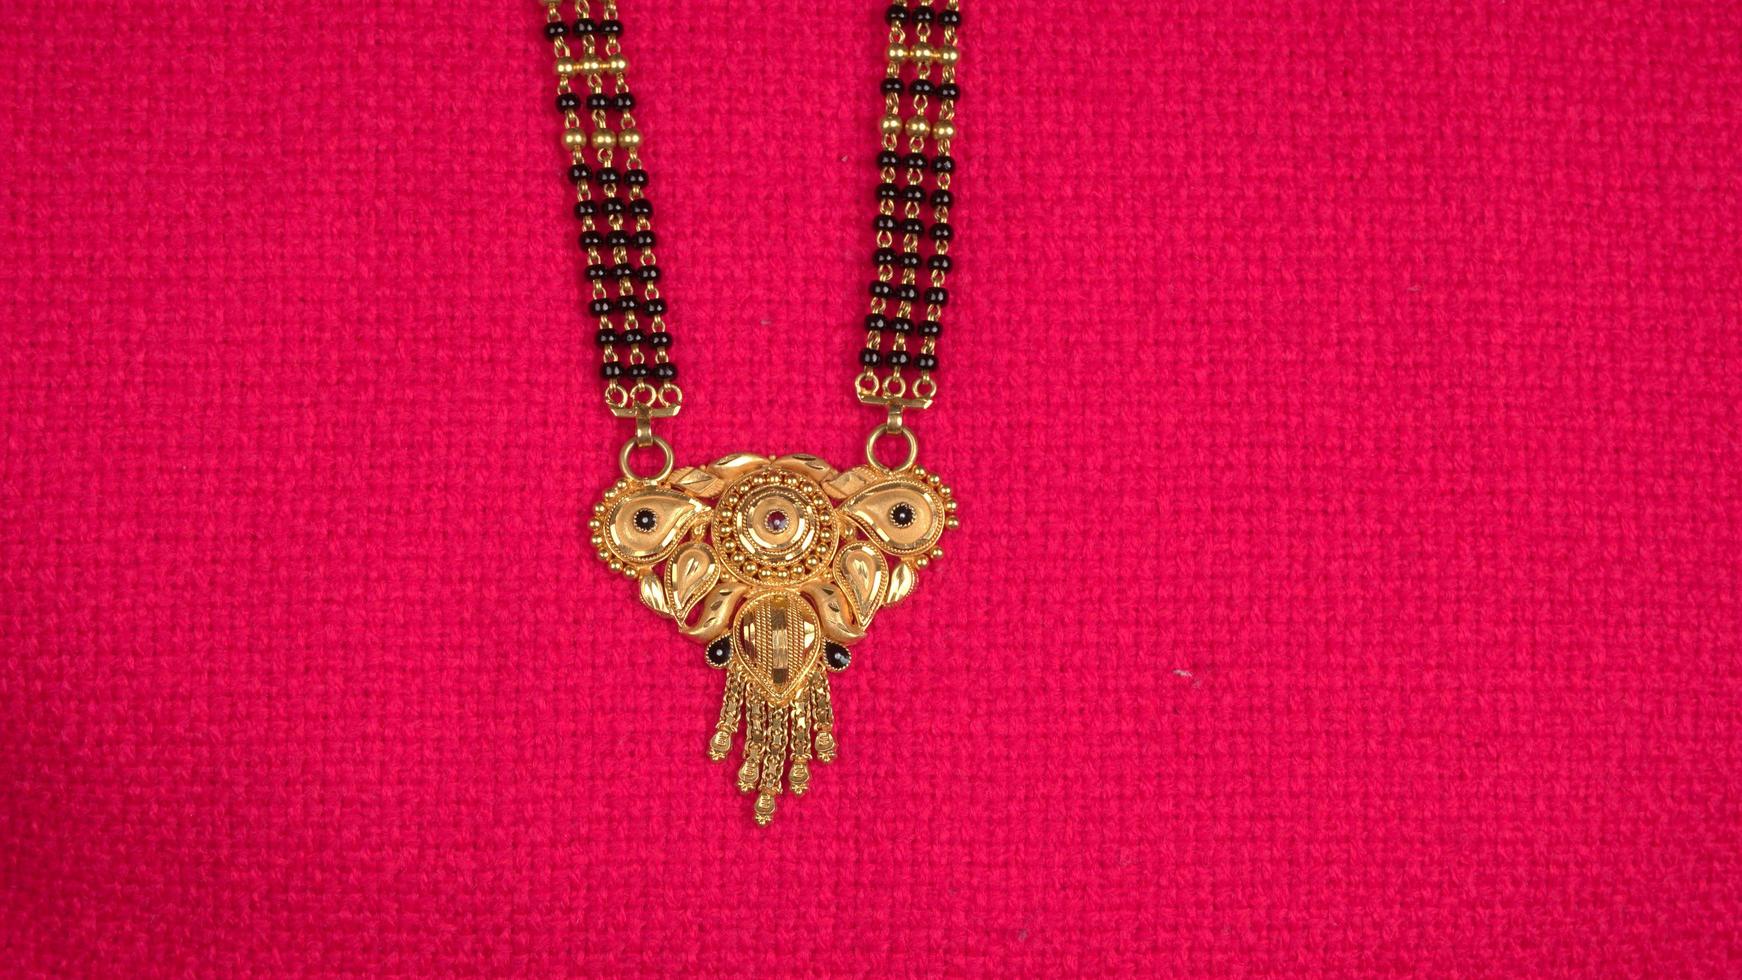 Mangalsutra or Golden Necklace to wear by a married hindu women, arranged with beautiful backgrond. Indian Traditional Jewellery. photo